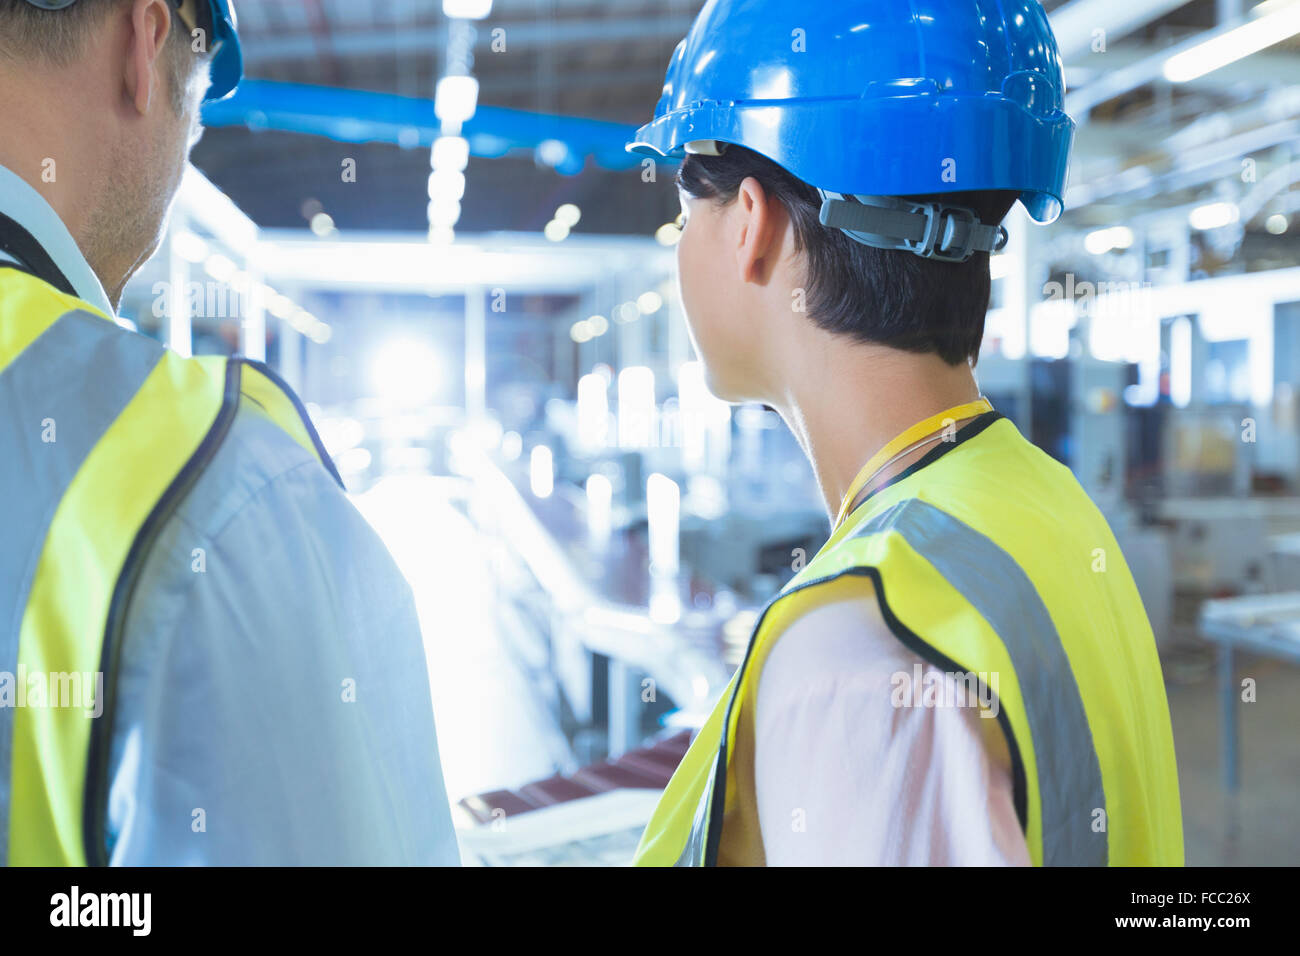 Workers in reflective clothing and hard-hat in factory Stock Photo